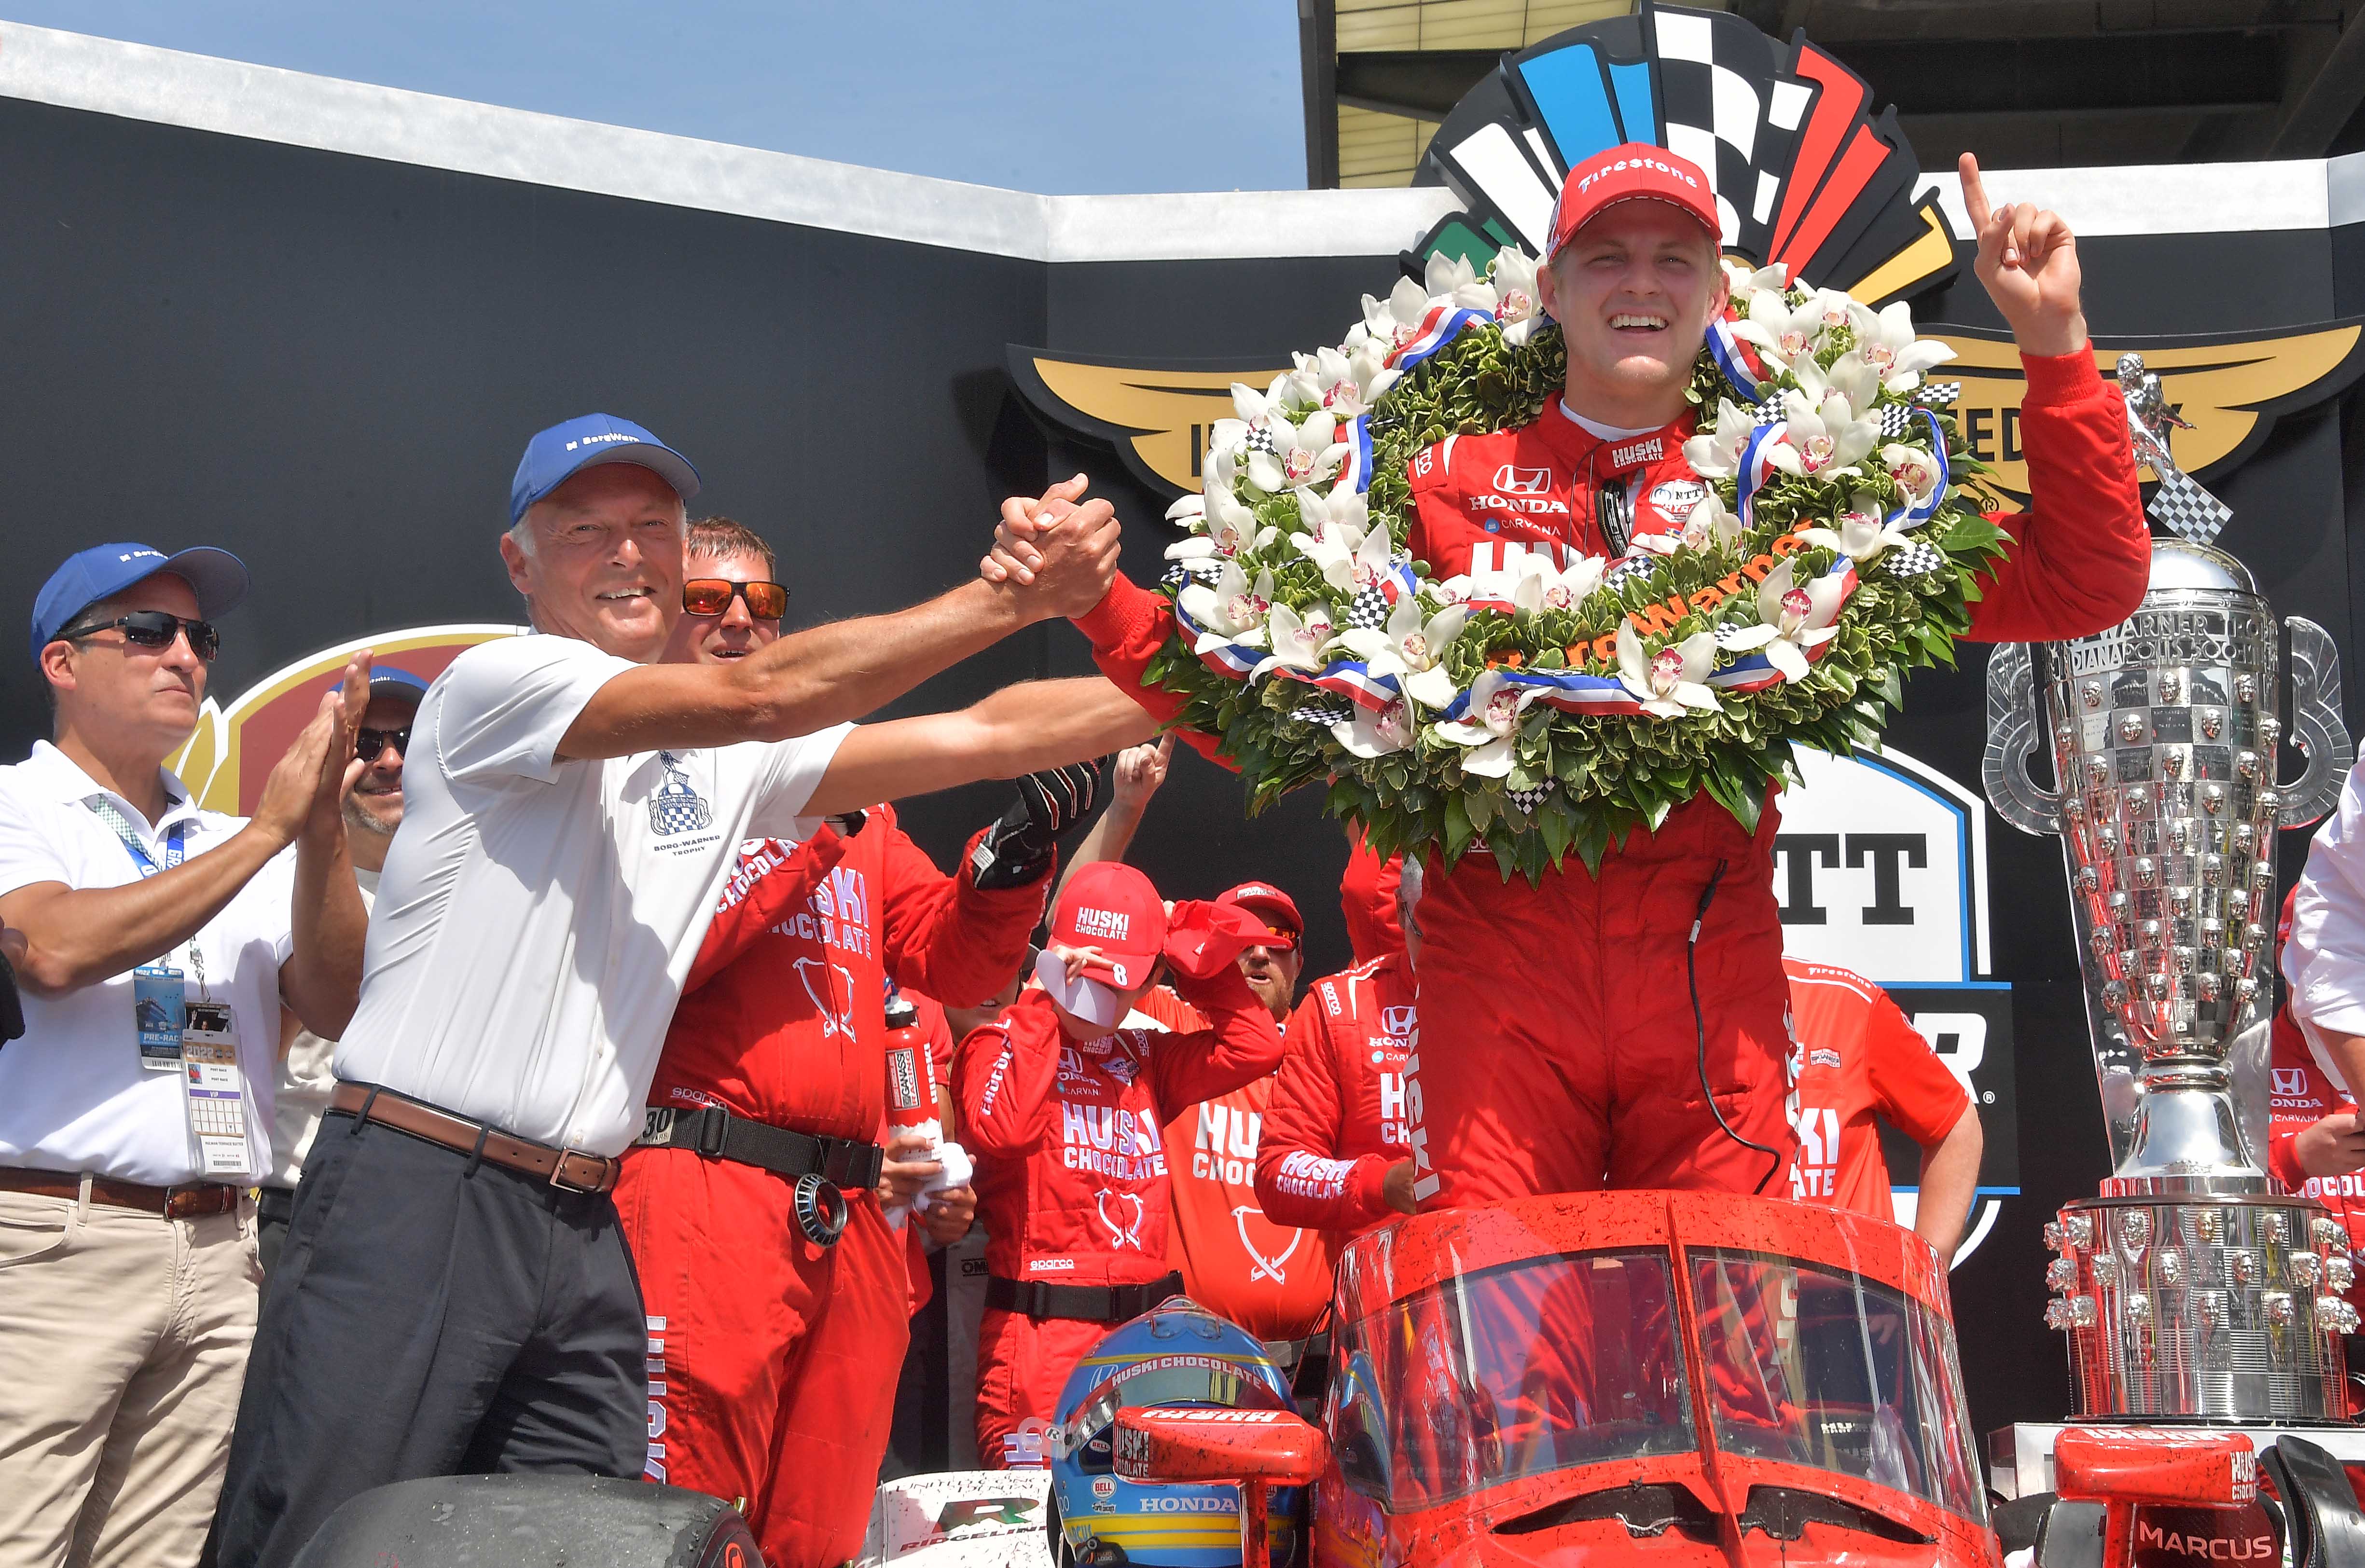 Man awards driver in red track suit with wreath and trophy